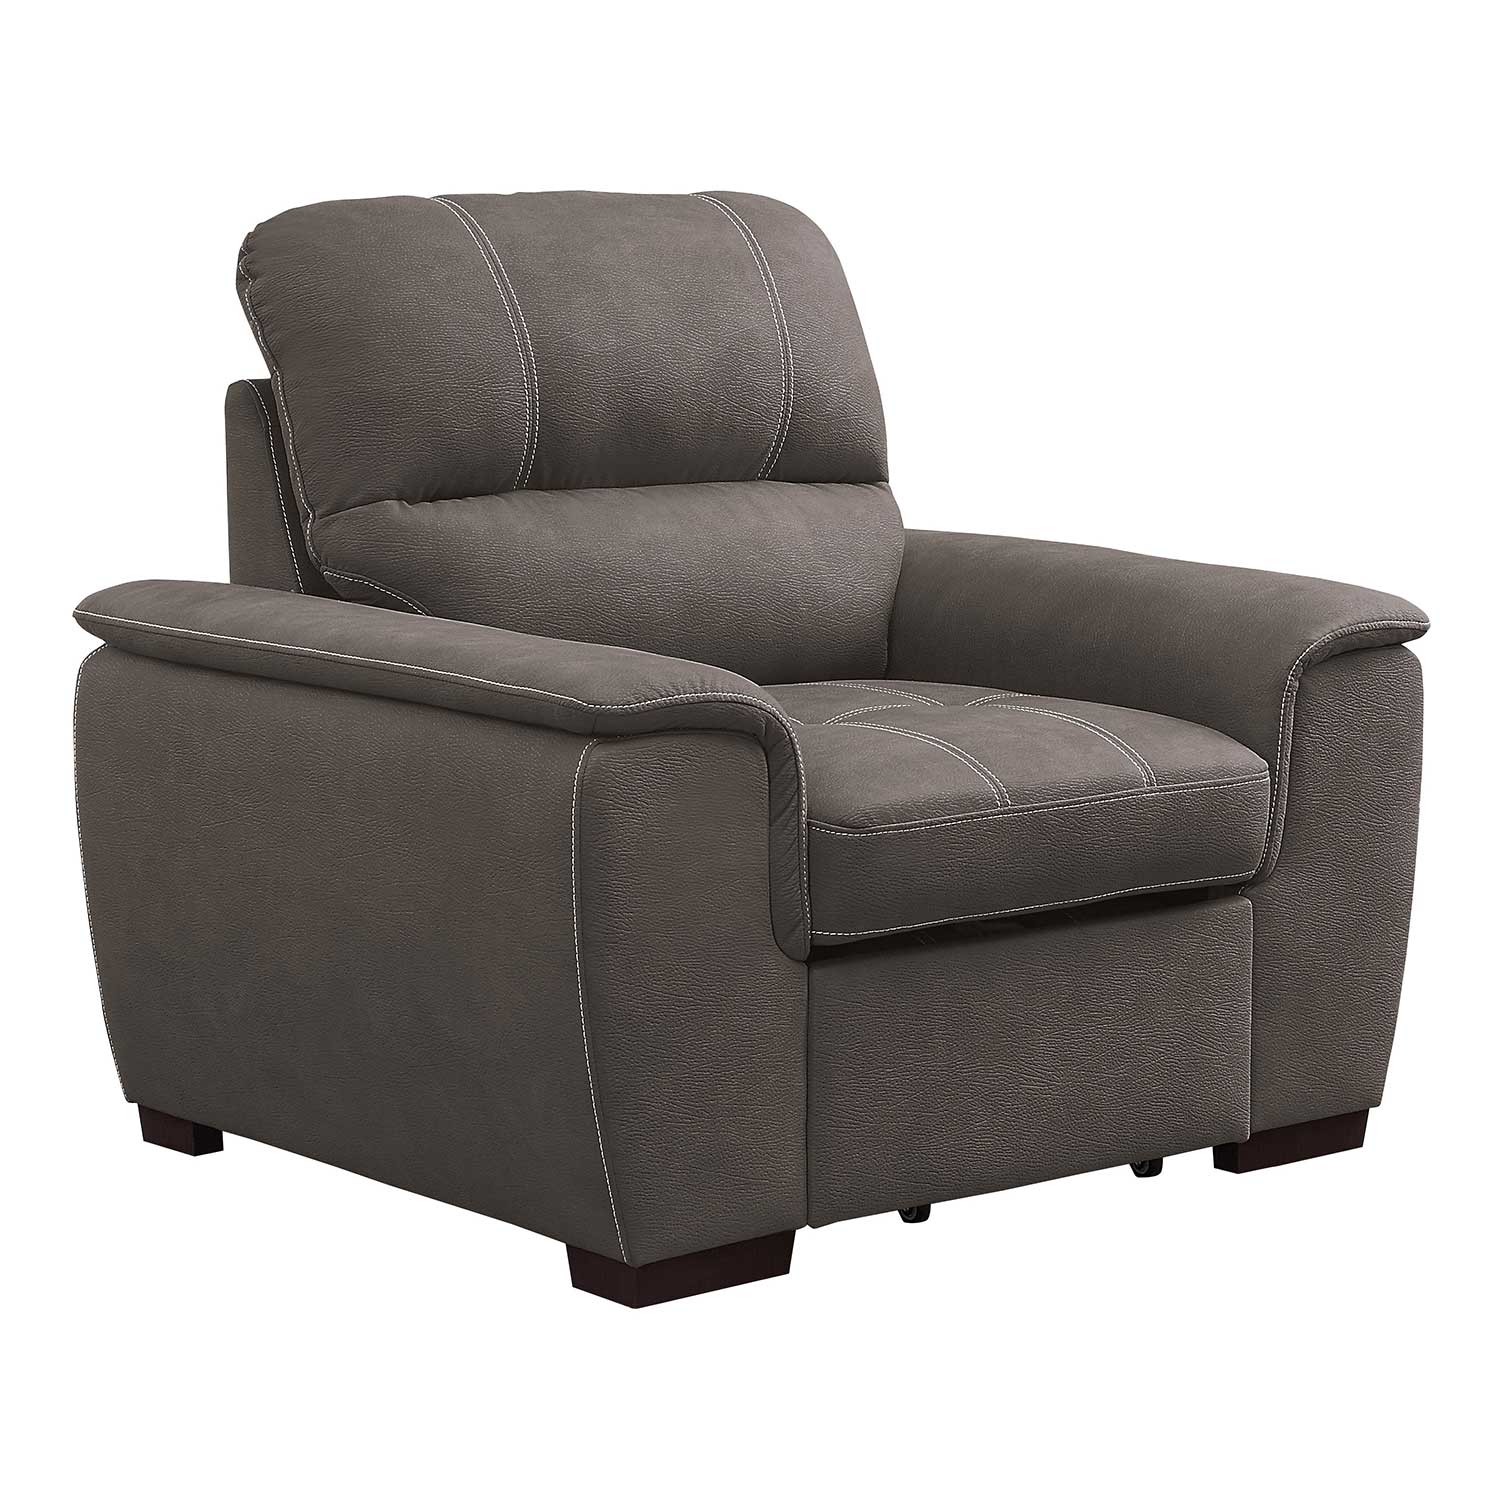 Homelegance Andes Chair with Pull-out Ottoman - Taupe